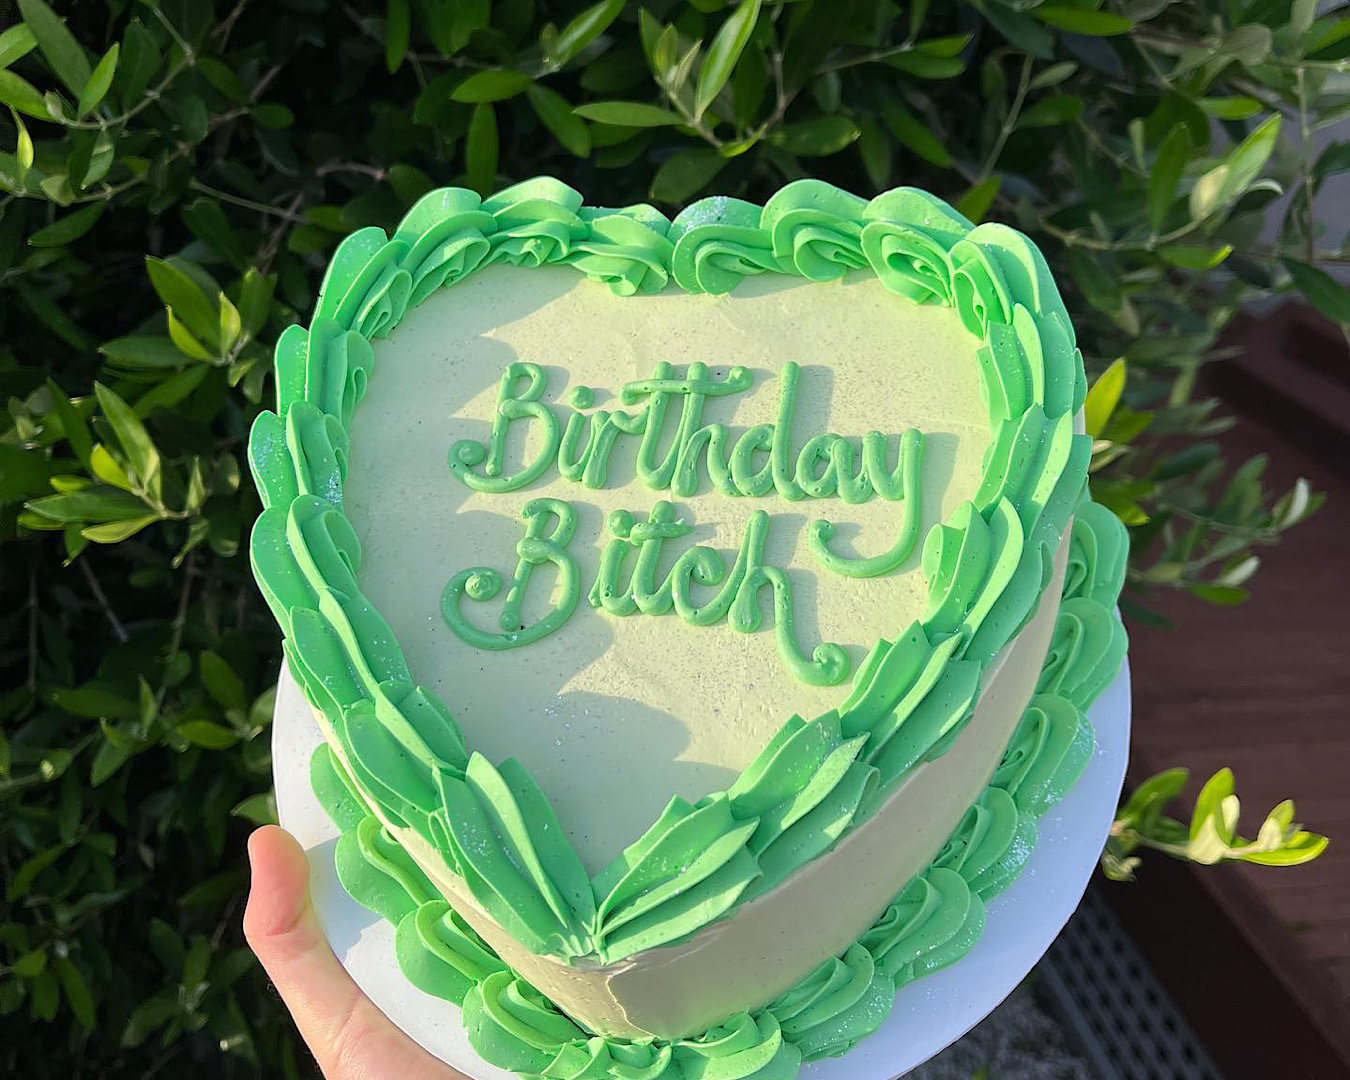 Lime green plant-based cake by Neat. with the words “Birthday Bitch” piped in icing.  